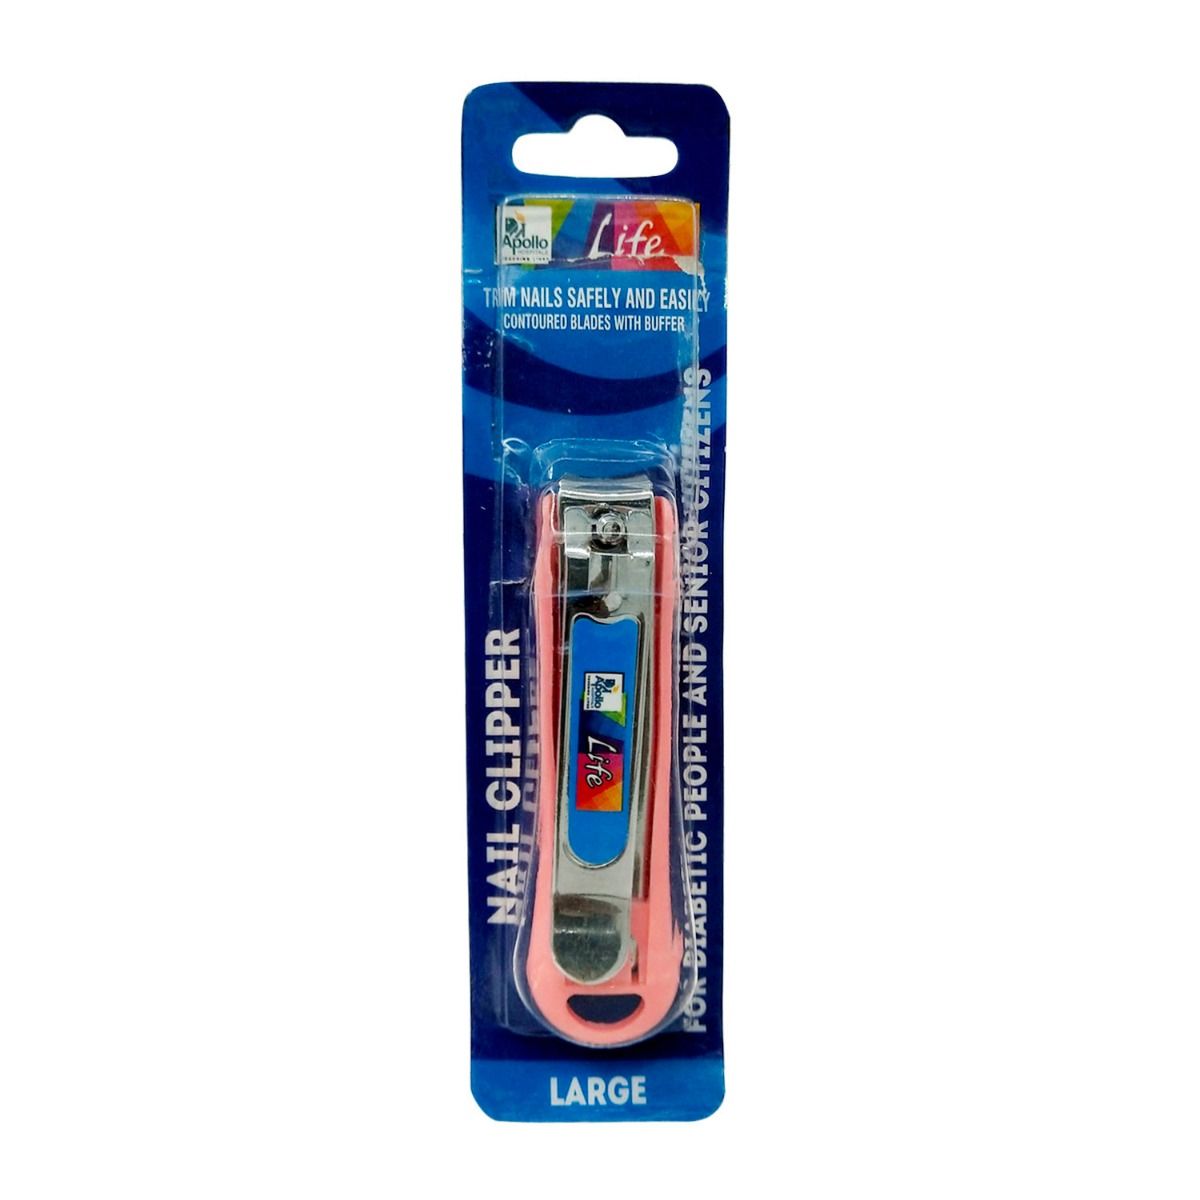 Buy Apollo Life Nail Clipper Large, 1 Count Online